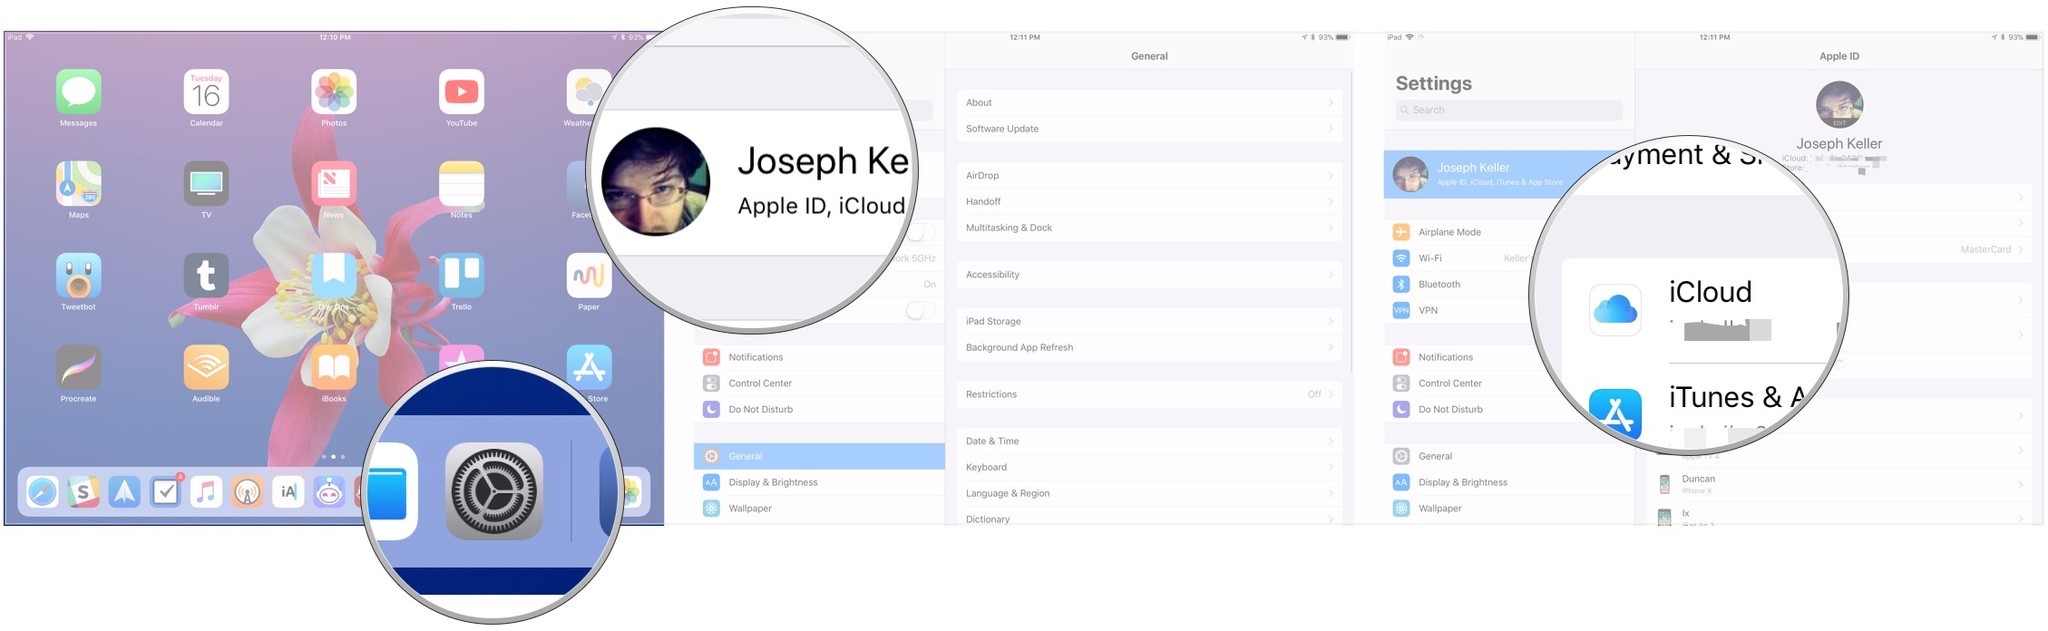 Transfer data by using iCloud to backup by showing steps: Open Settings, tap Apple ID banner, tap iClouda